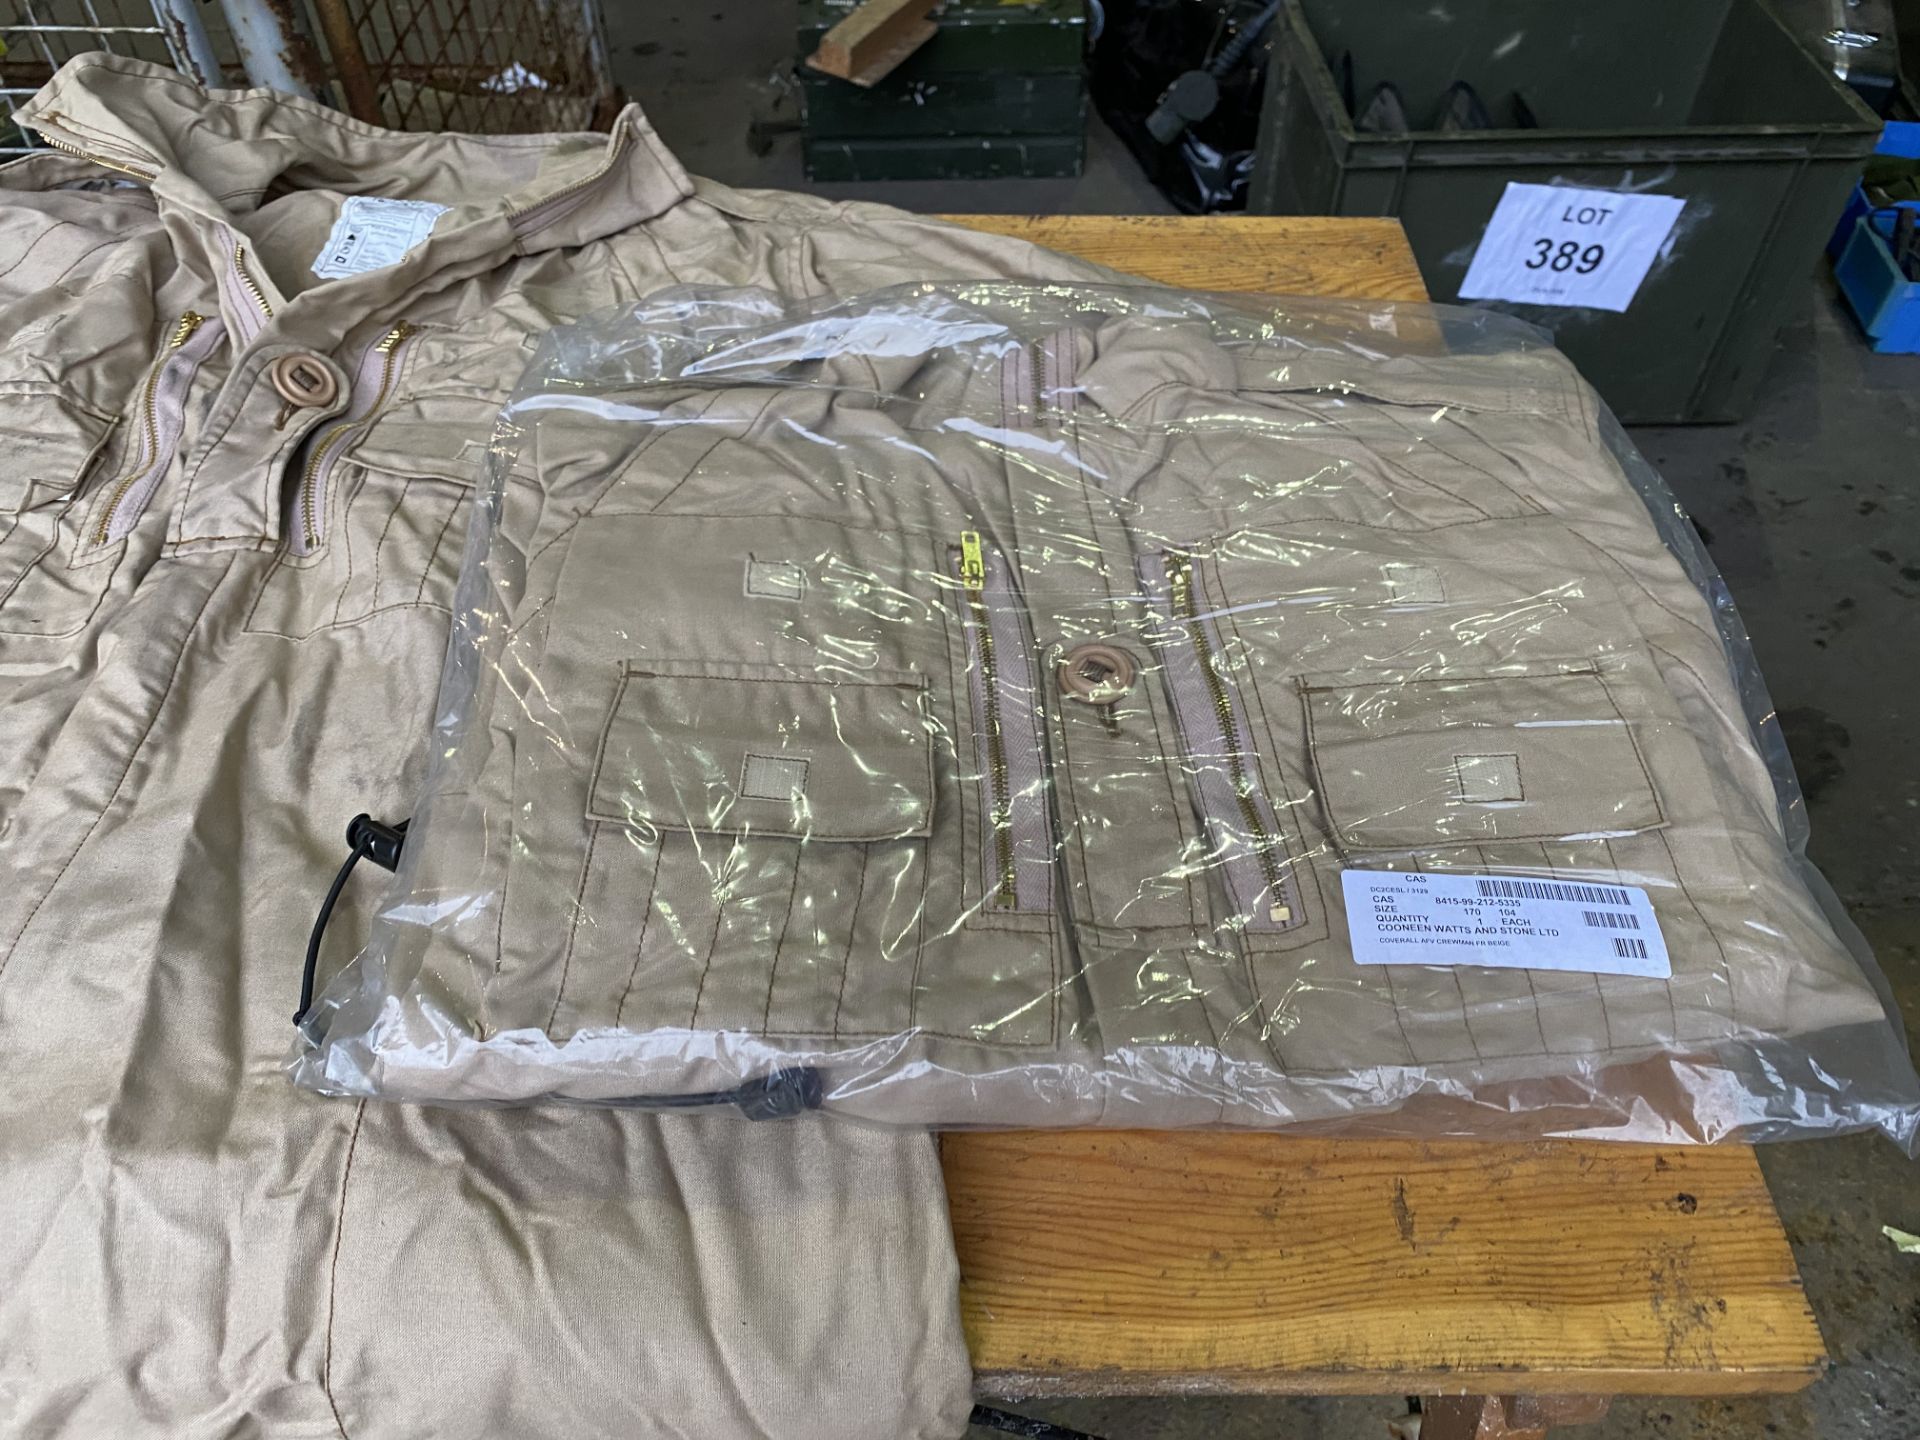 2 x New Unissued AFV Crew mans Coverall in Original Packing - Image 6 of 7